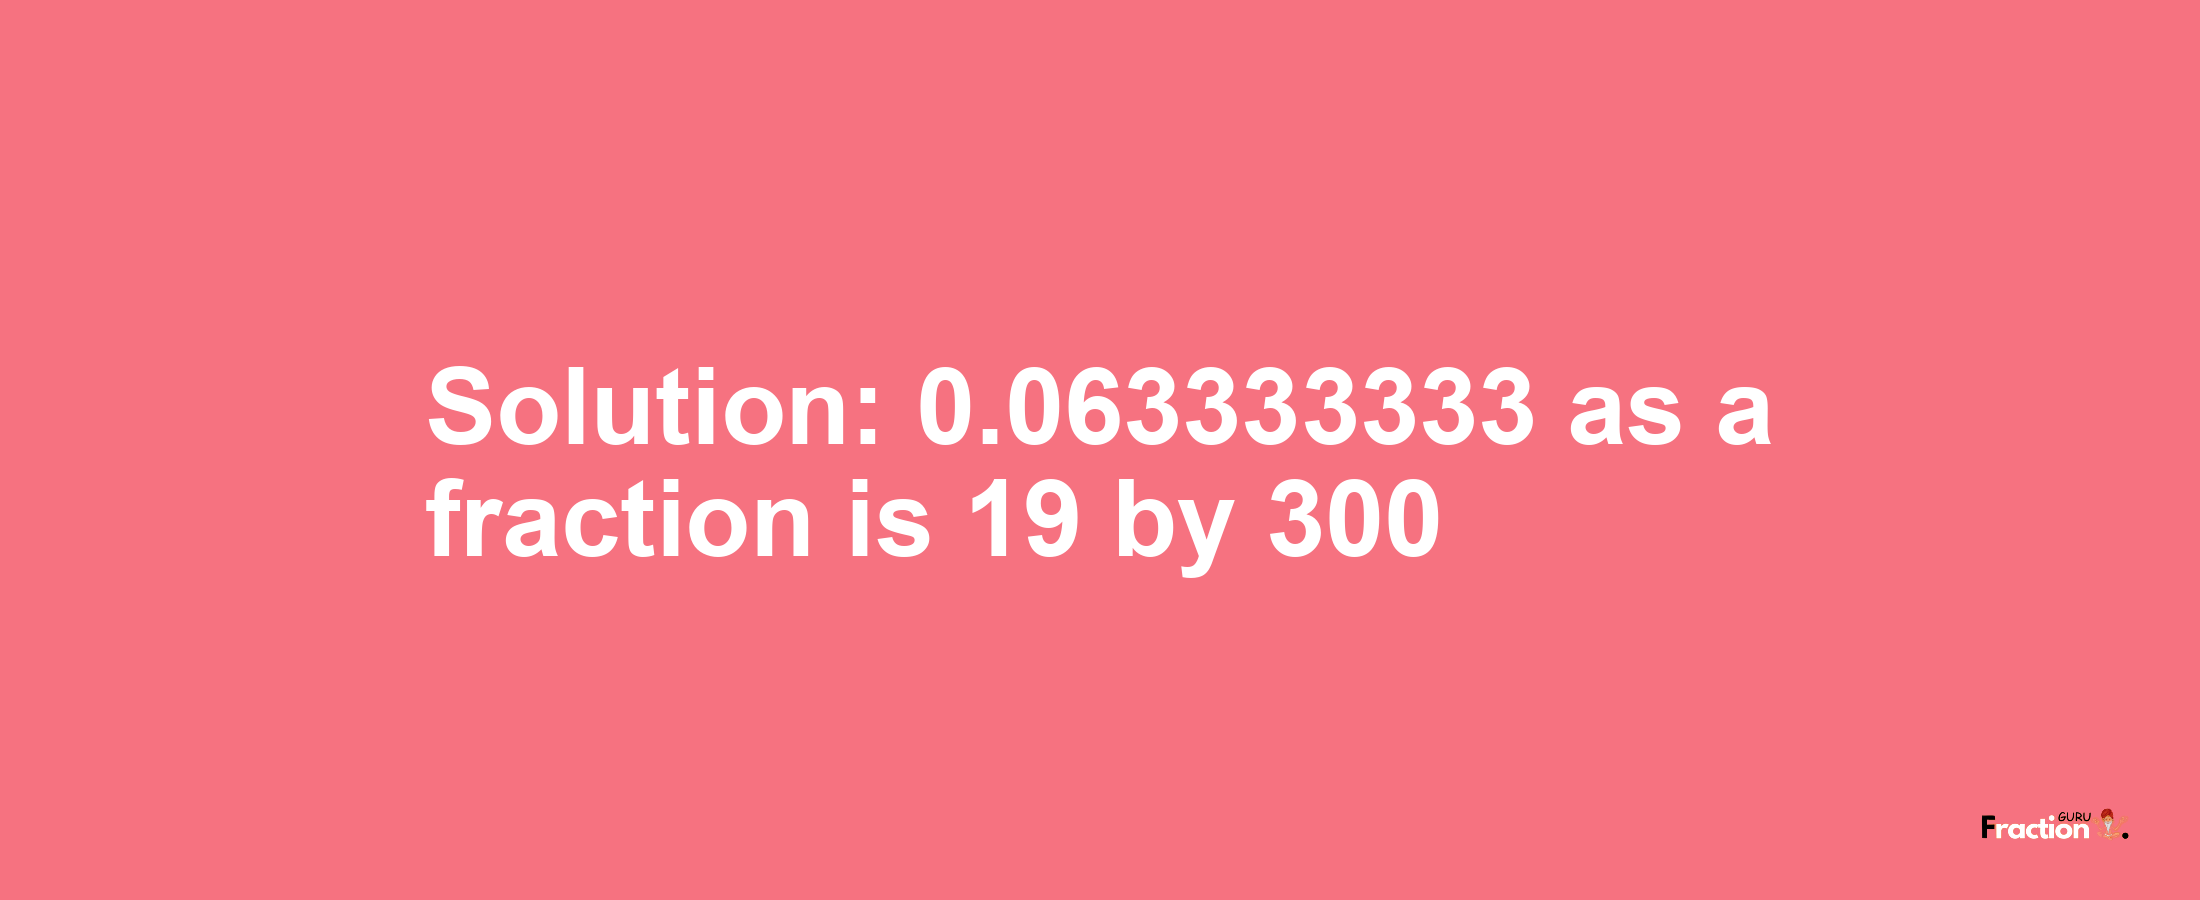 Solution:0.063333333 as a fraction is 19/300